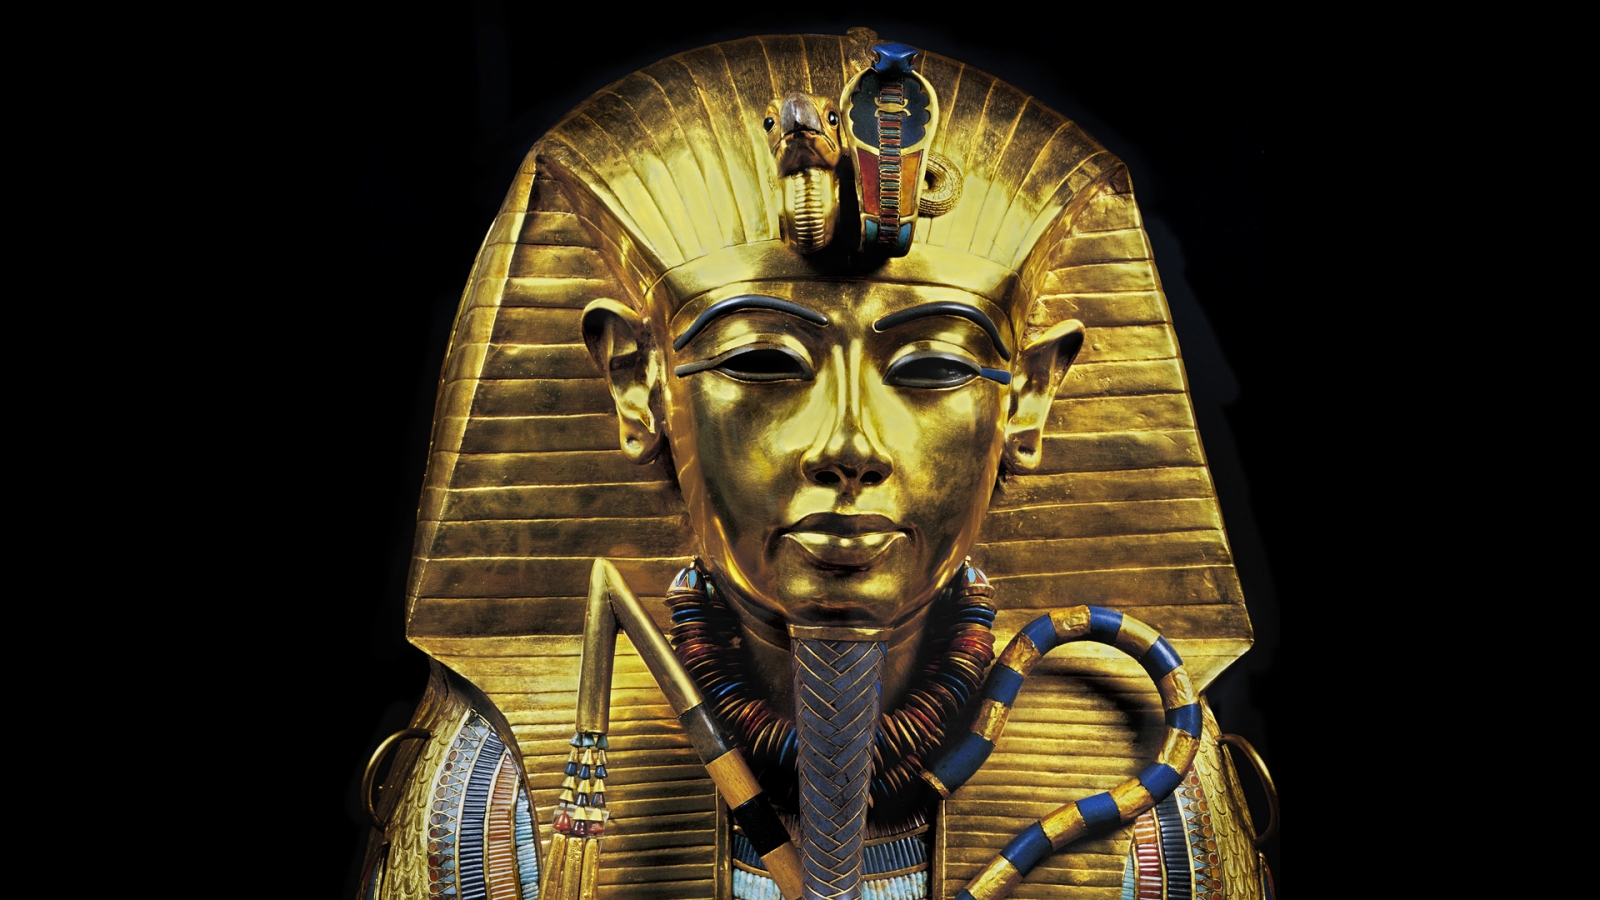 Pharaoh S Fortune Slots Explained We Show You Where To